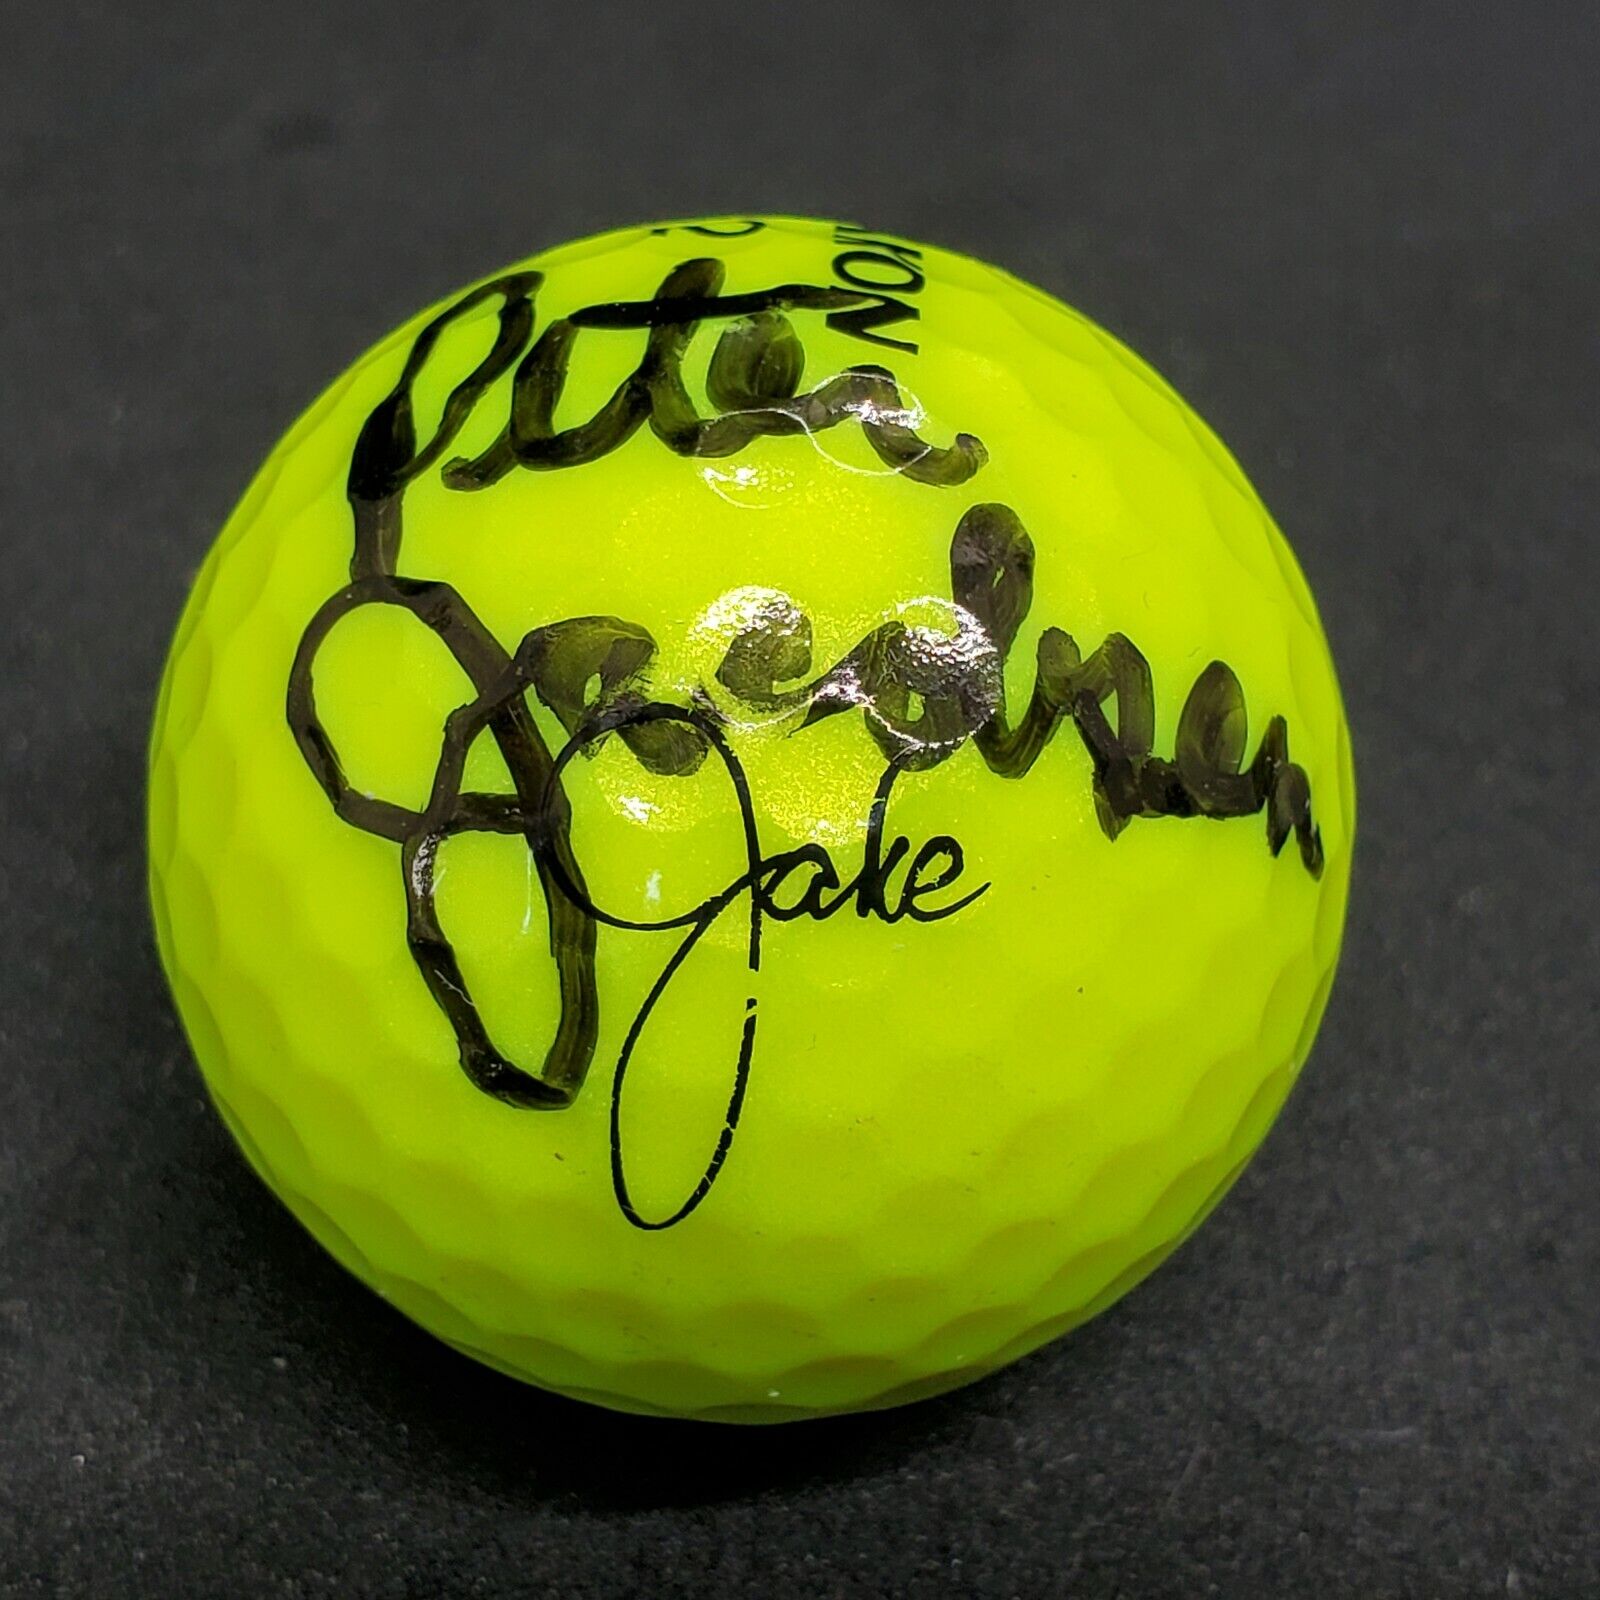 Peter Jacobsen Tournament Game Used Autographed Signed Srixon Golf Ball PGA